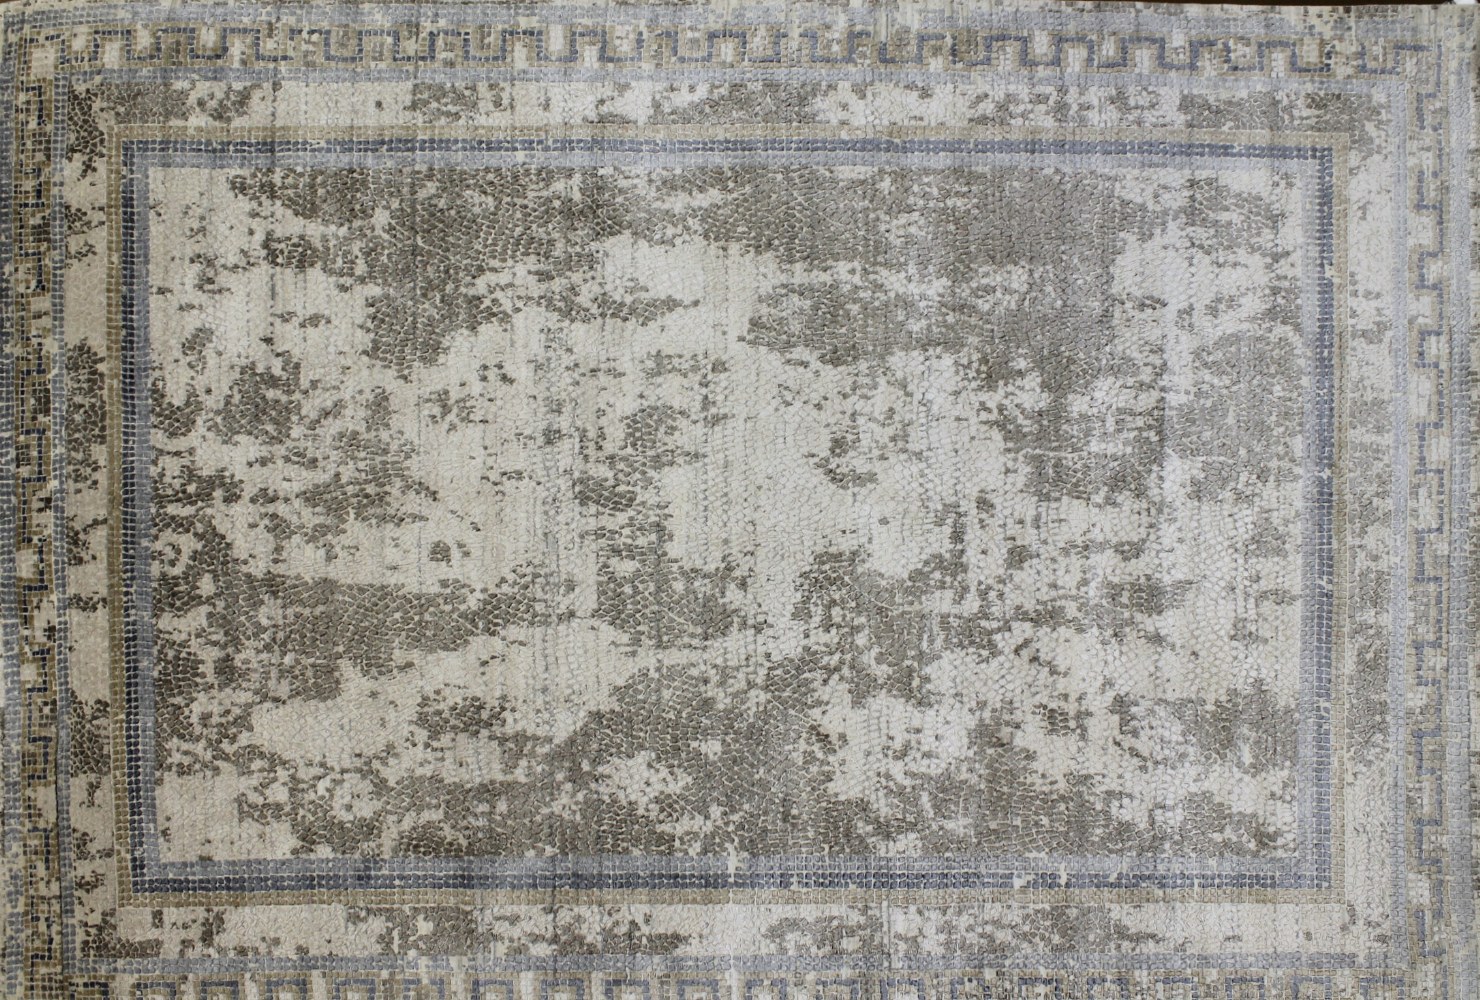 10x14 Transitional Hand Knotted Wool & Viscose Area Rug - MR022667